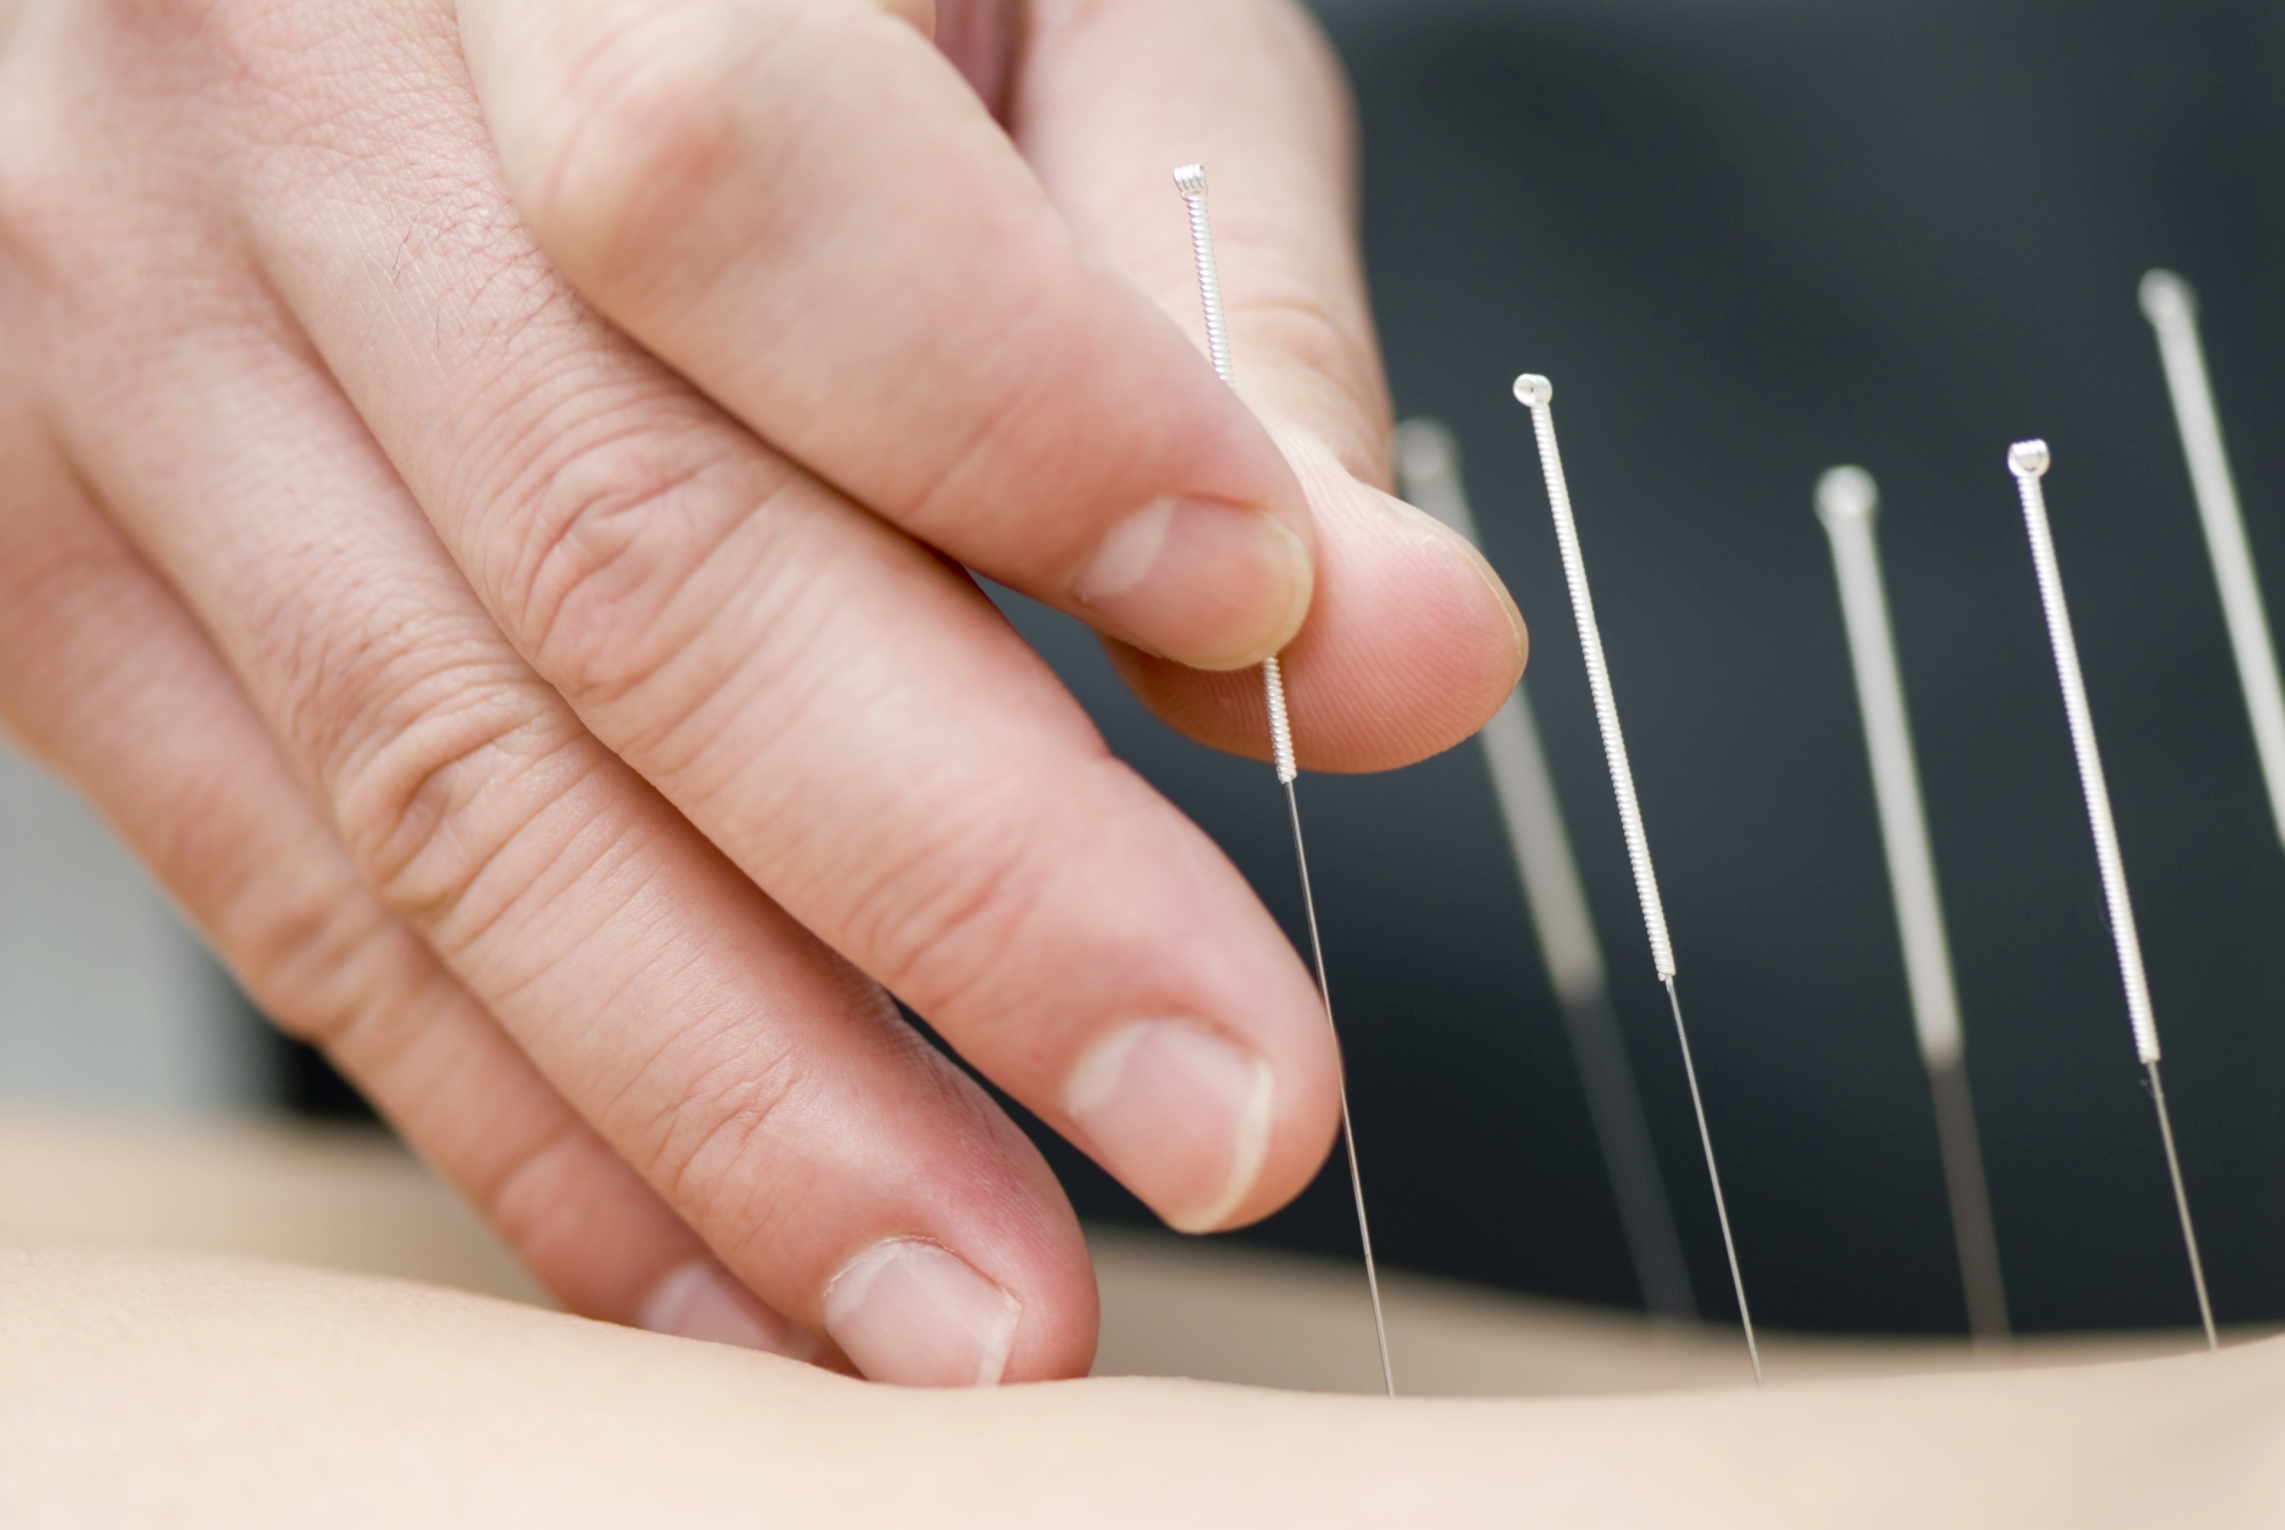 Can acupuncture help you lose weight?